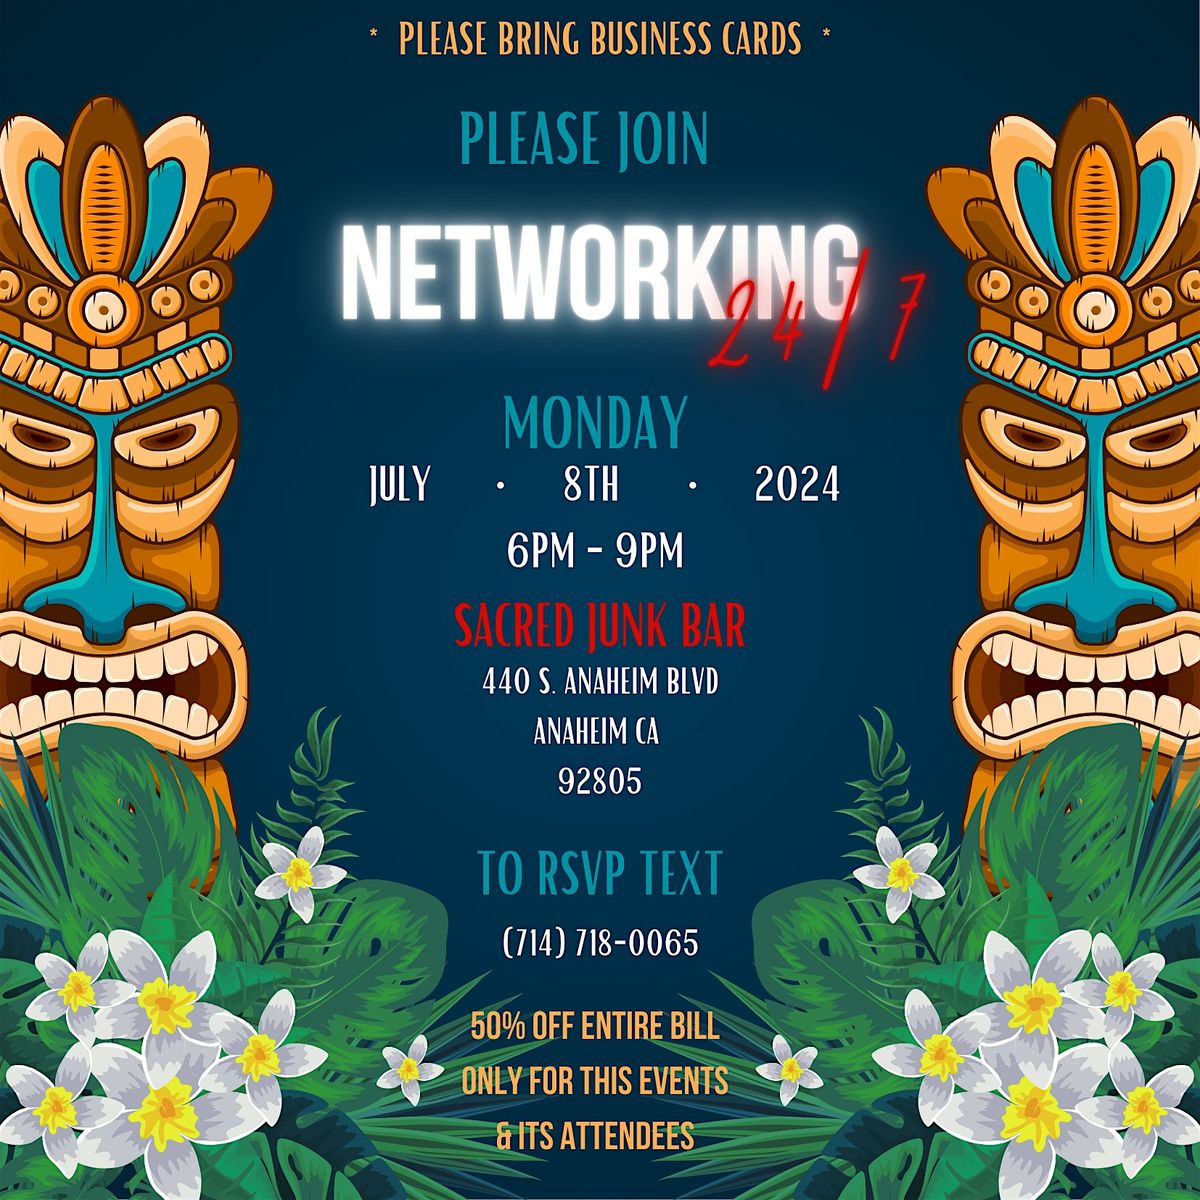 NETWORKING 24\/7